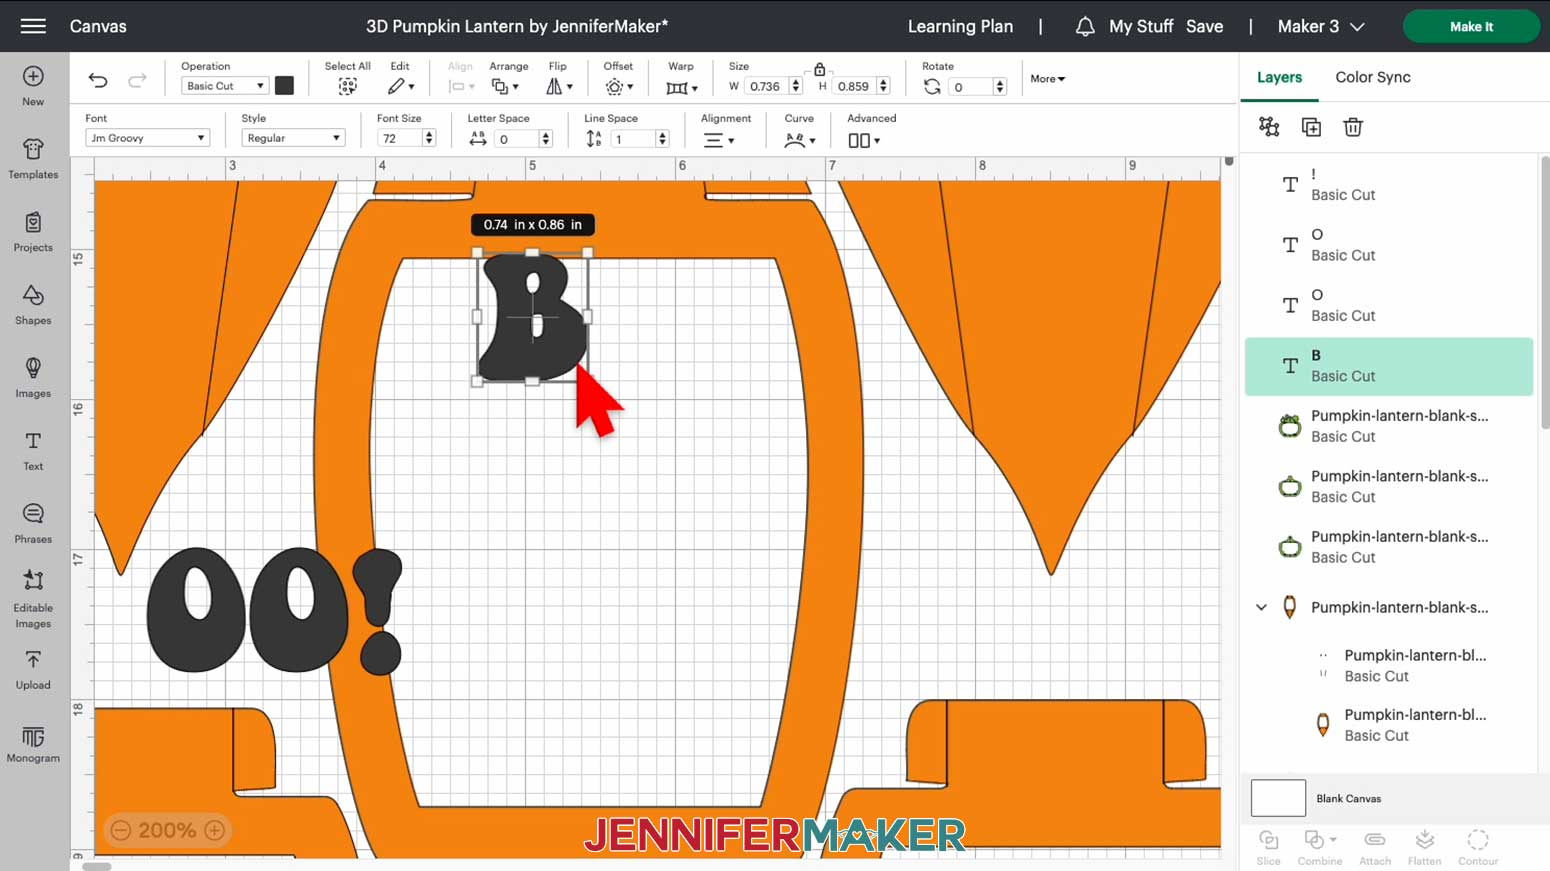 In Design Space, move the "B" into position so it overlaps the top of the orange panel frame for the customized 3D pumpkin lantern